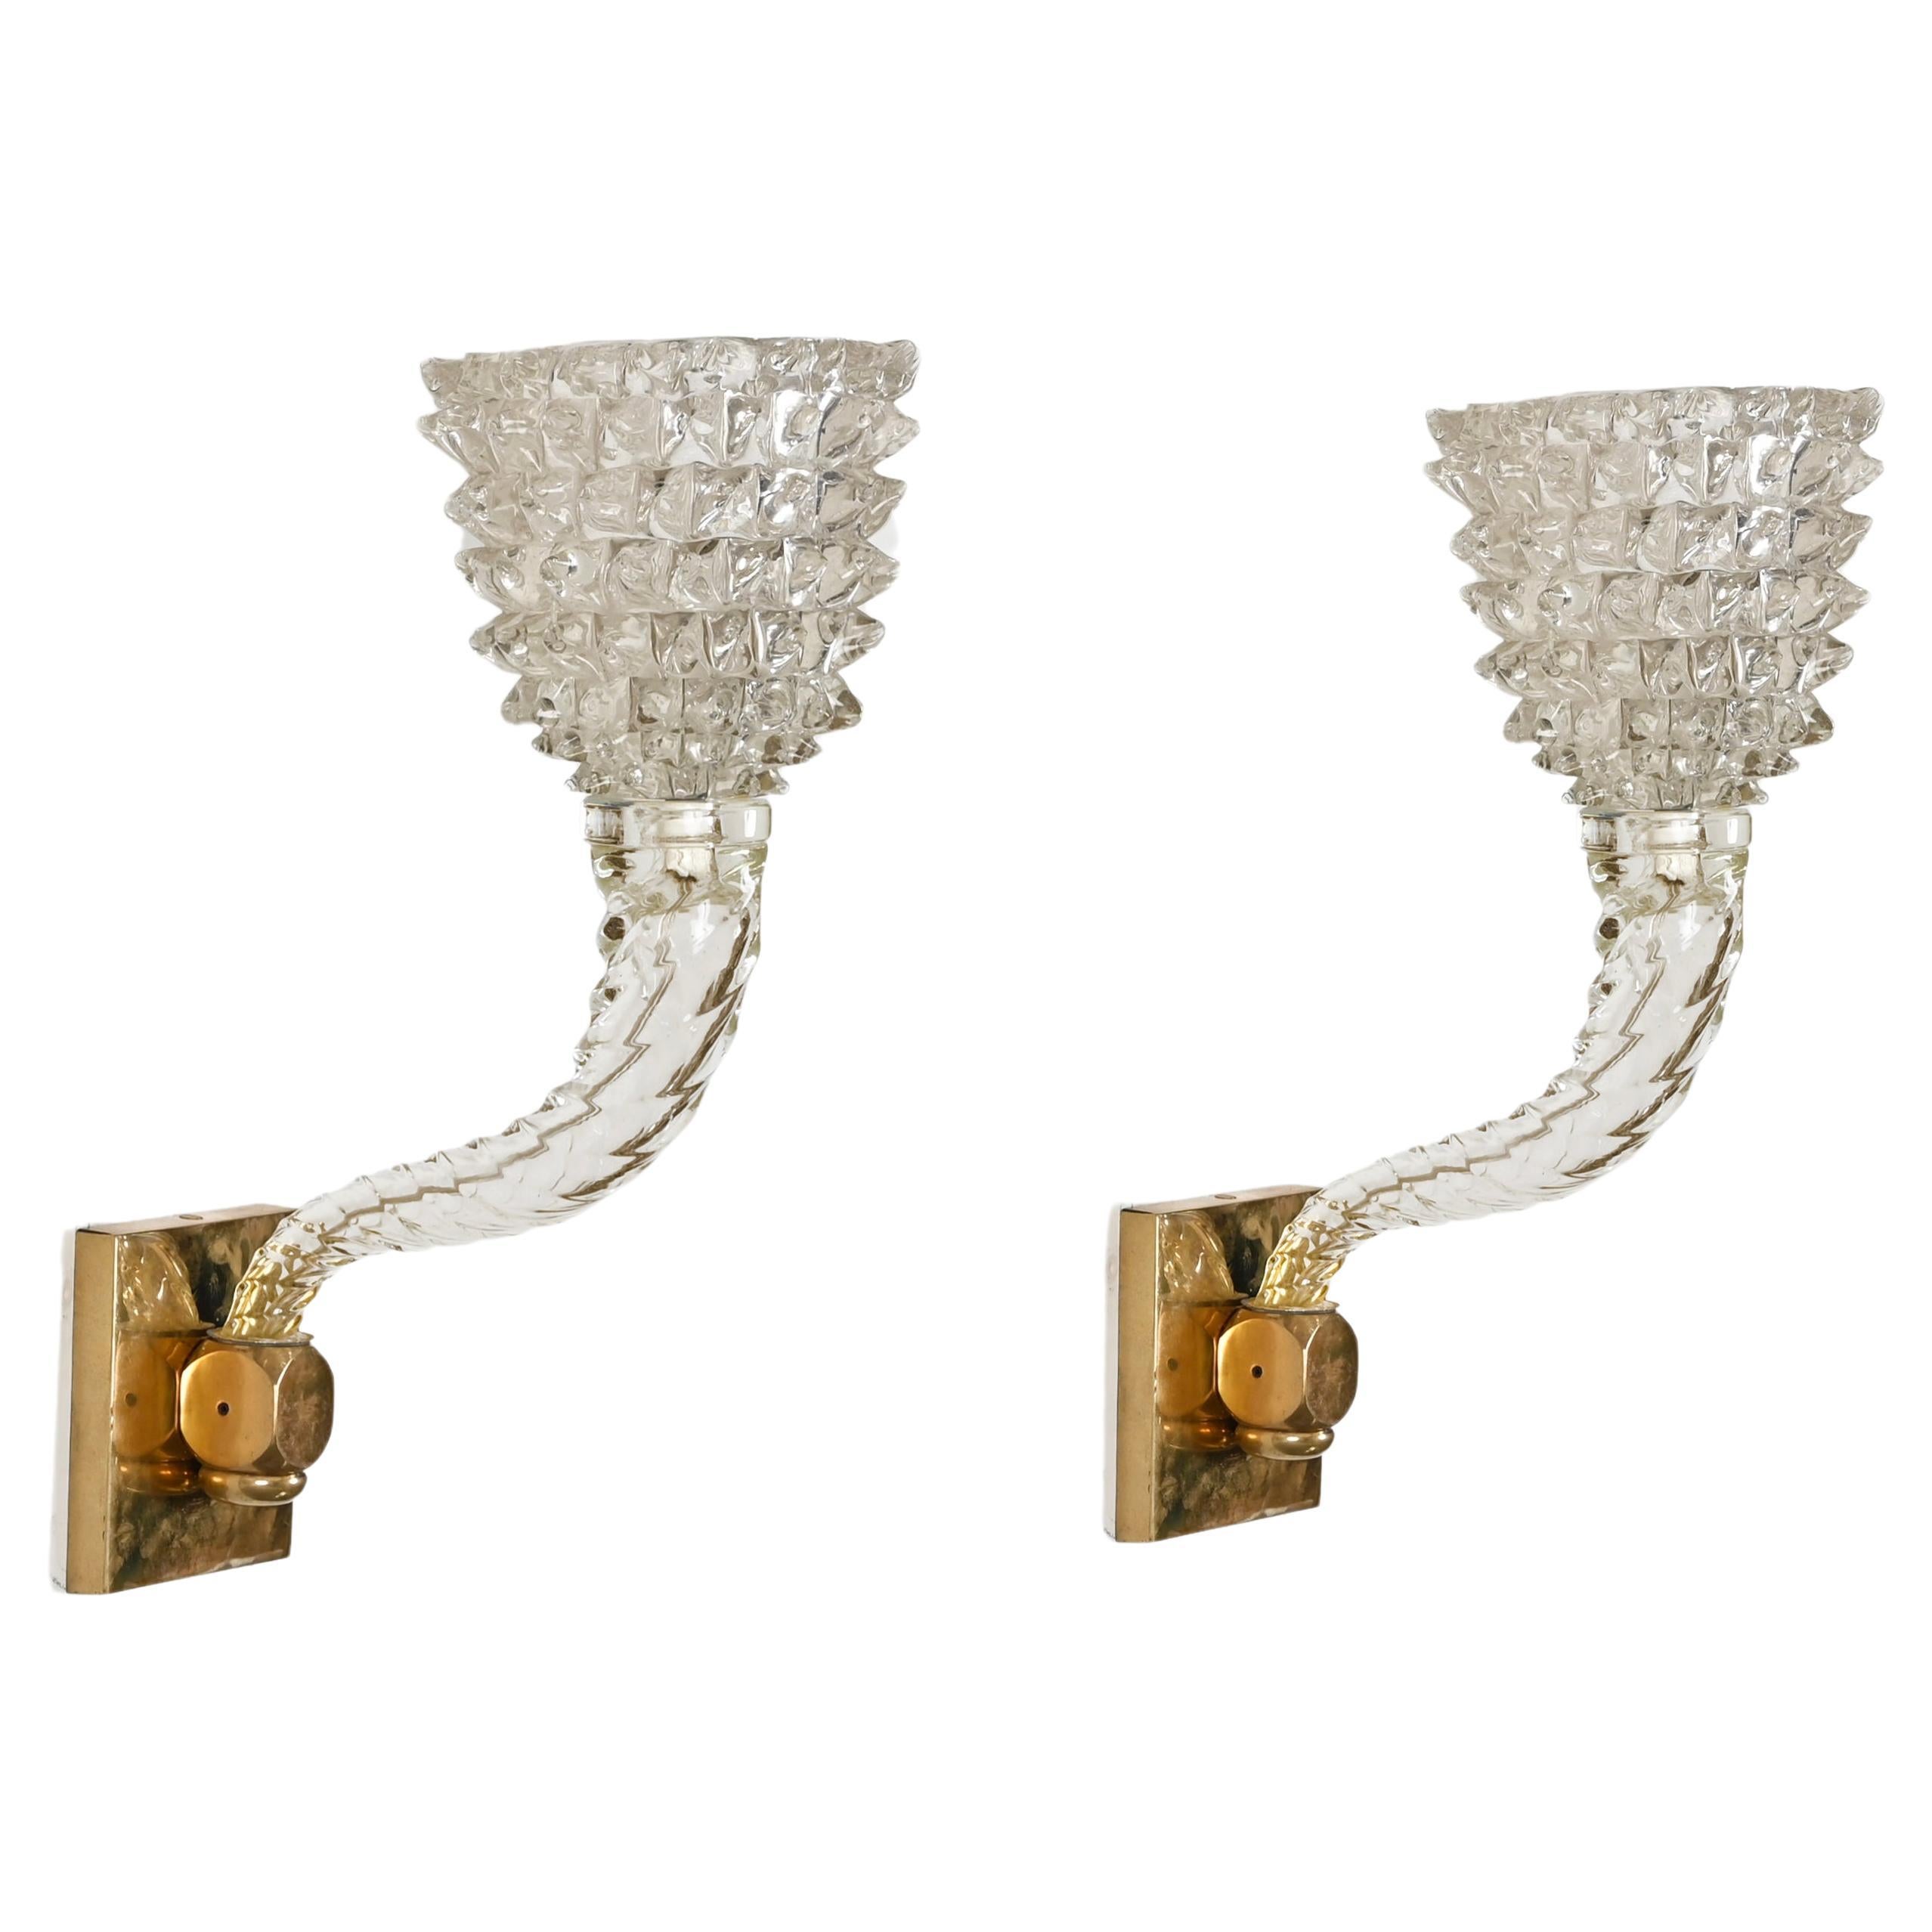 Pair of Barovier Murano Rostrato Twisted Glass and Brass Sconces, Italy 1950s For Sale